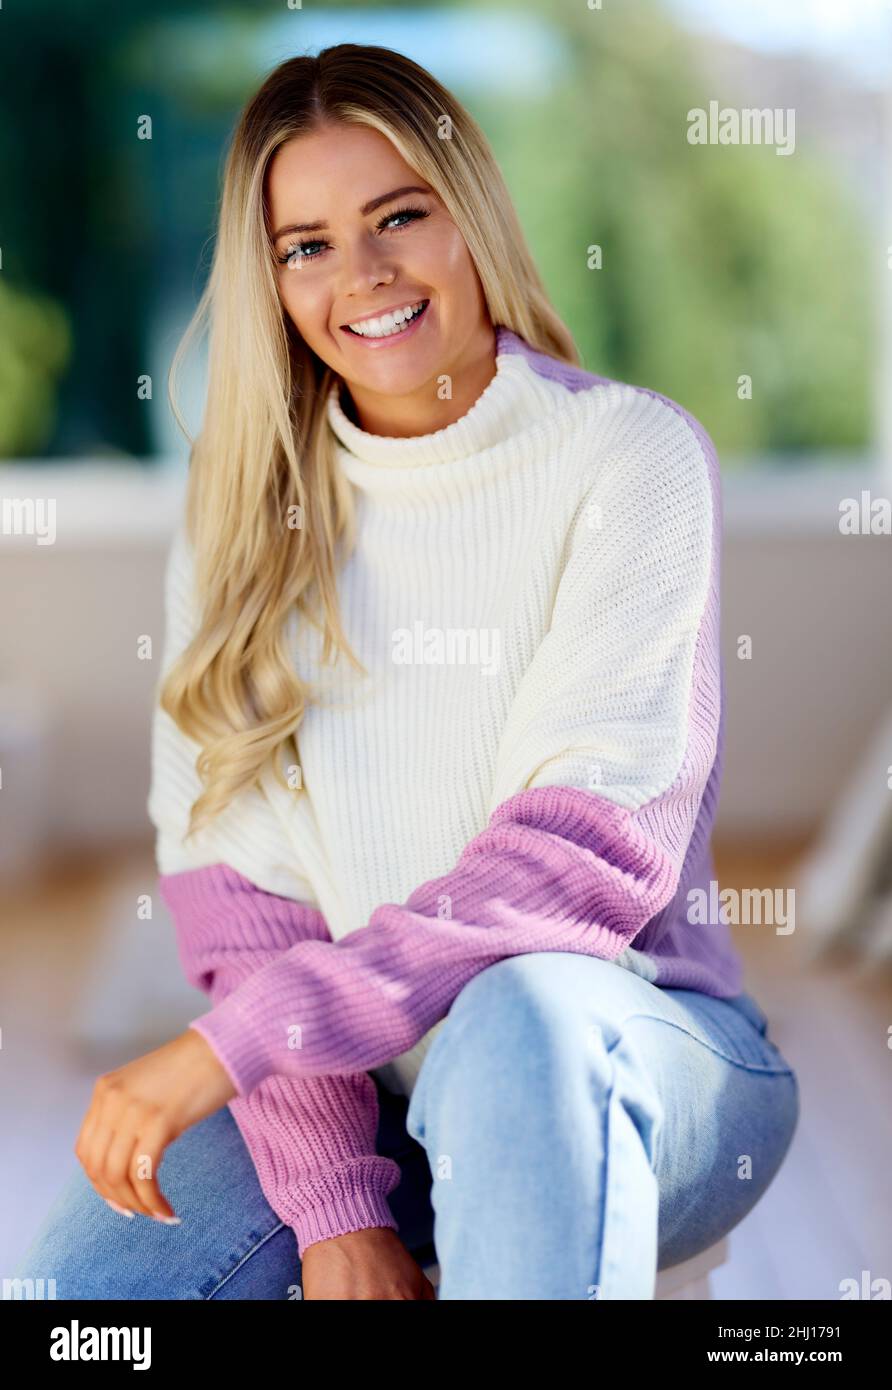 Portrait of smiling blonde woman Stock Photo